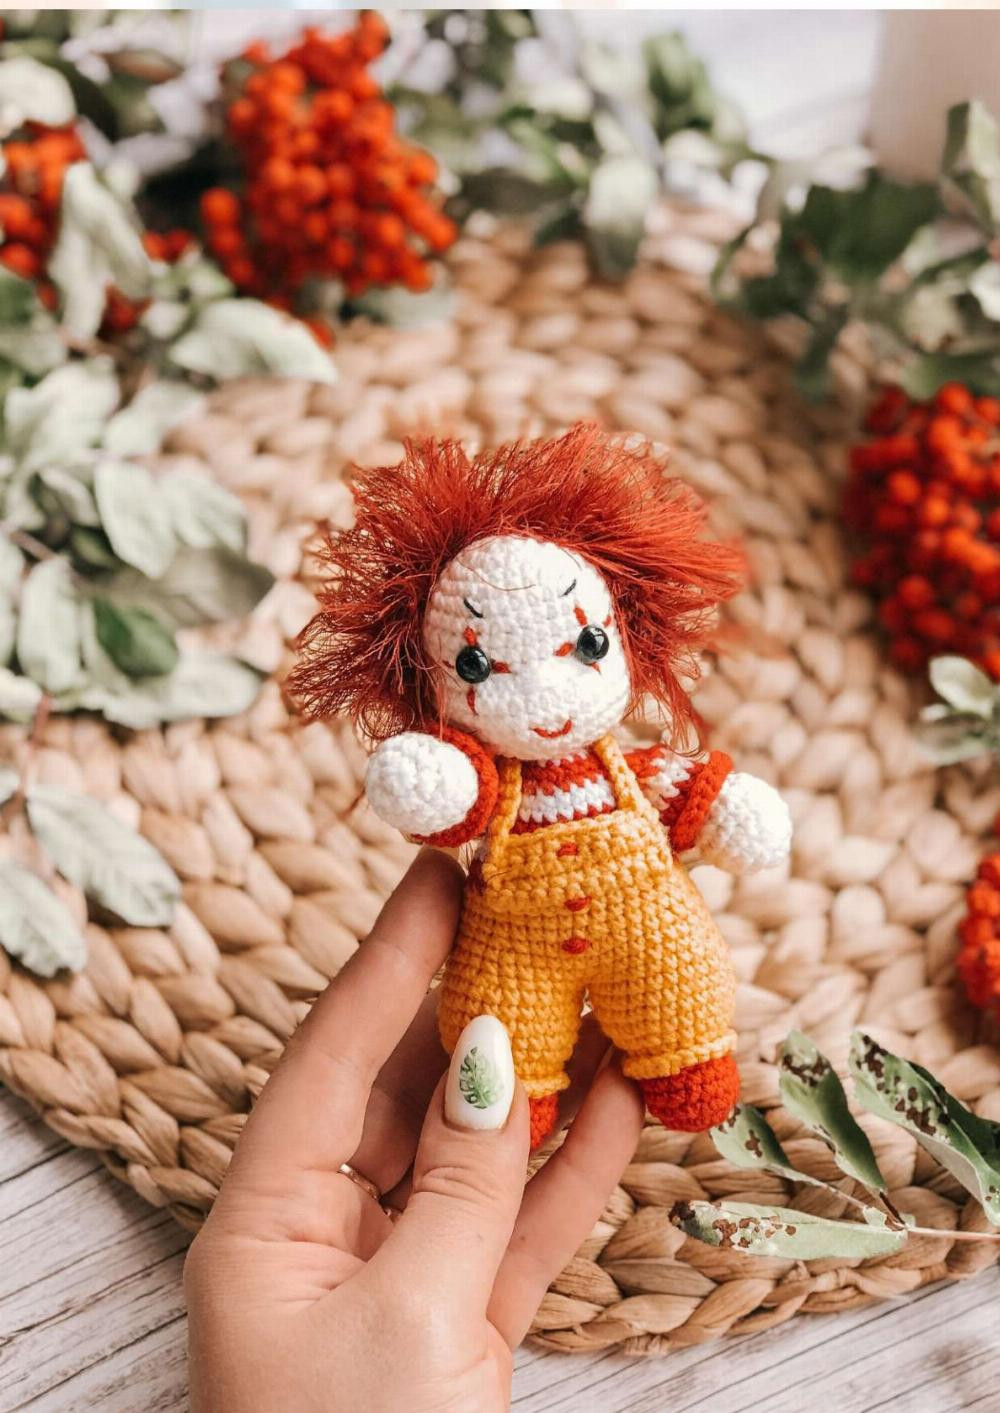 CROCHET PATTERN CLOWNESS BETTY, curly hair doll wearing red outfit.